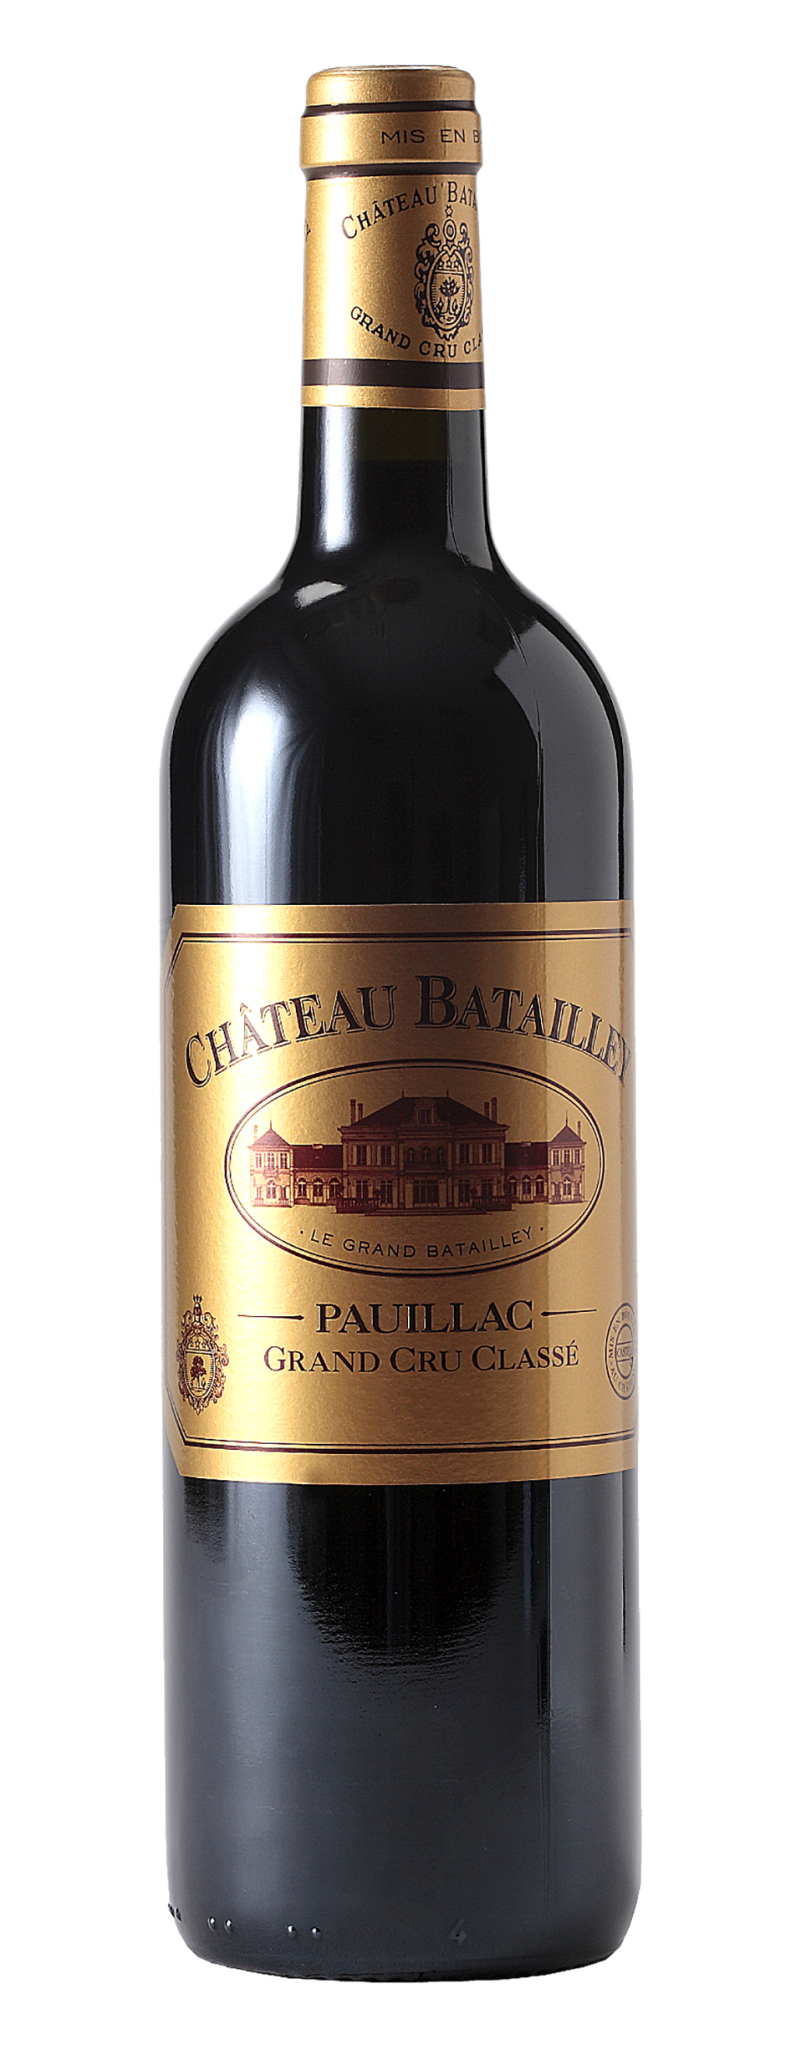 Chateau Batailley 2015  - 750ml